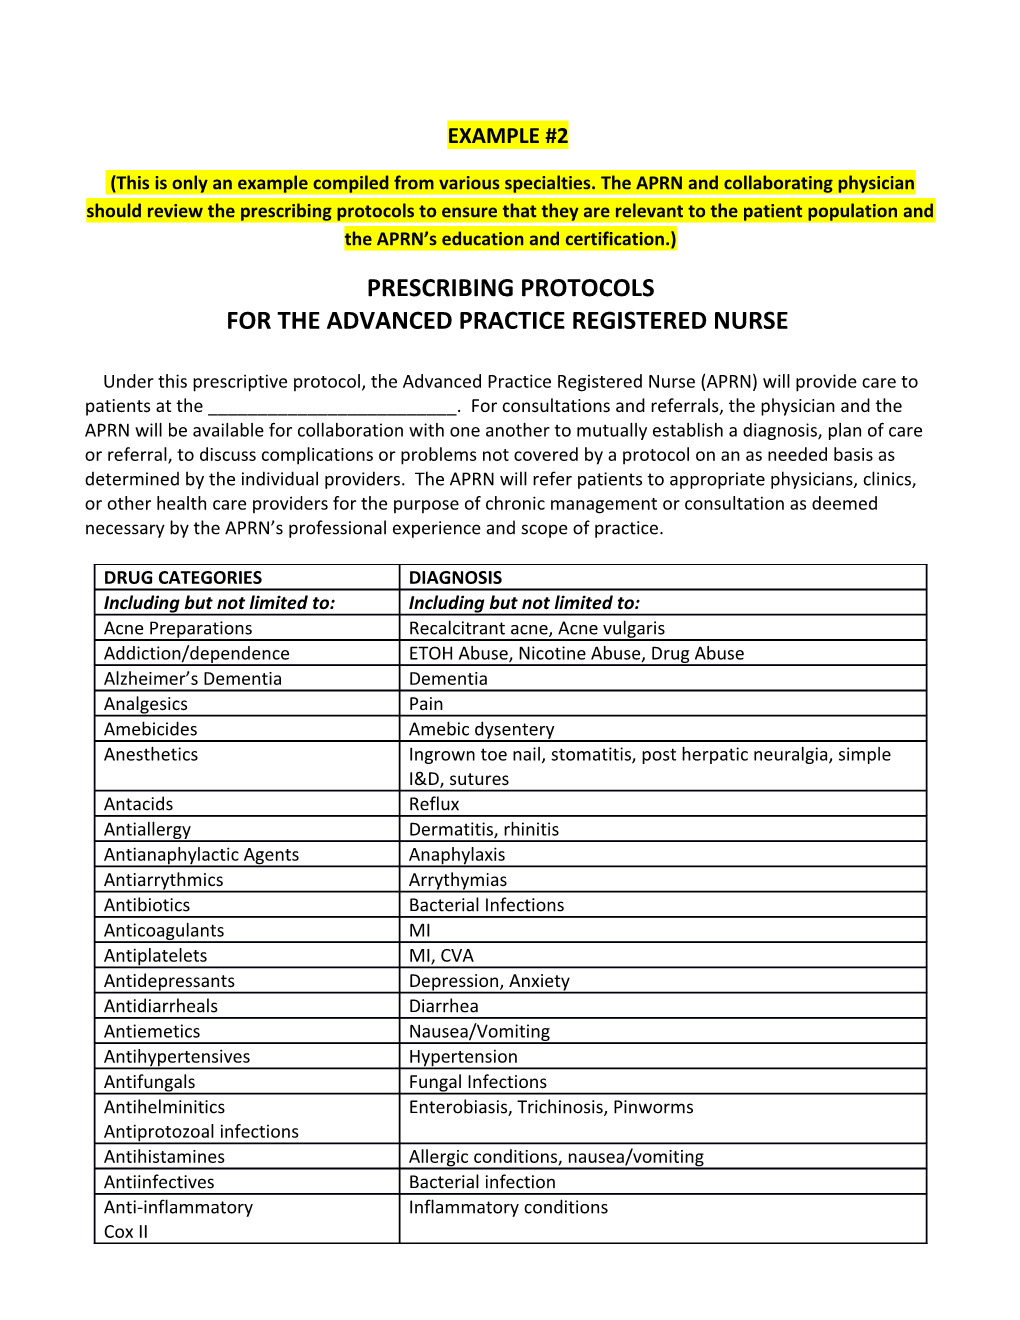 For the Advanced Practice Registered Nurse